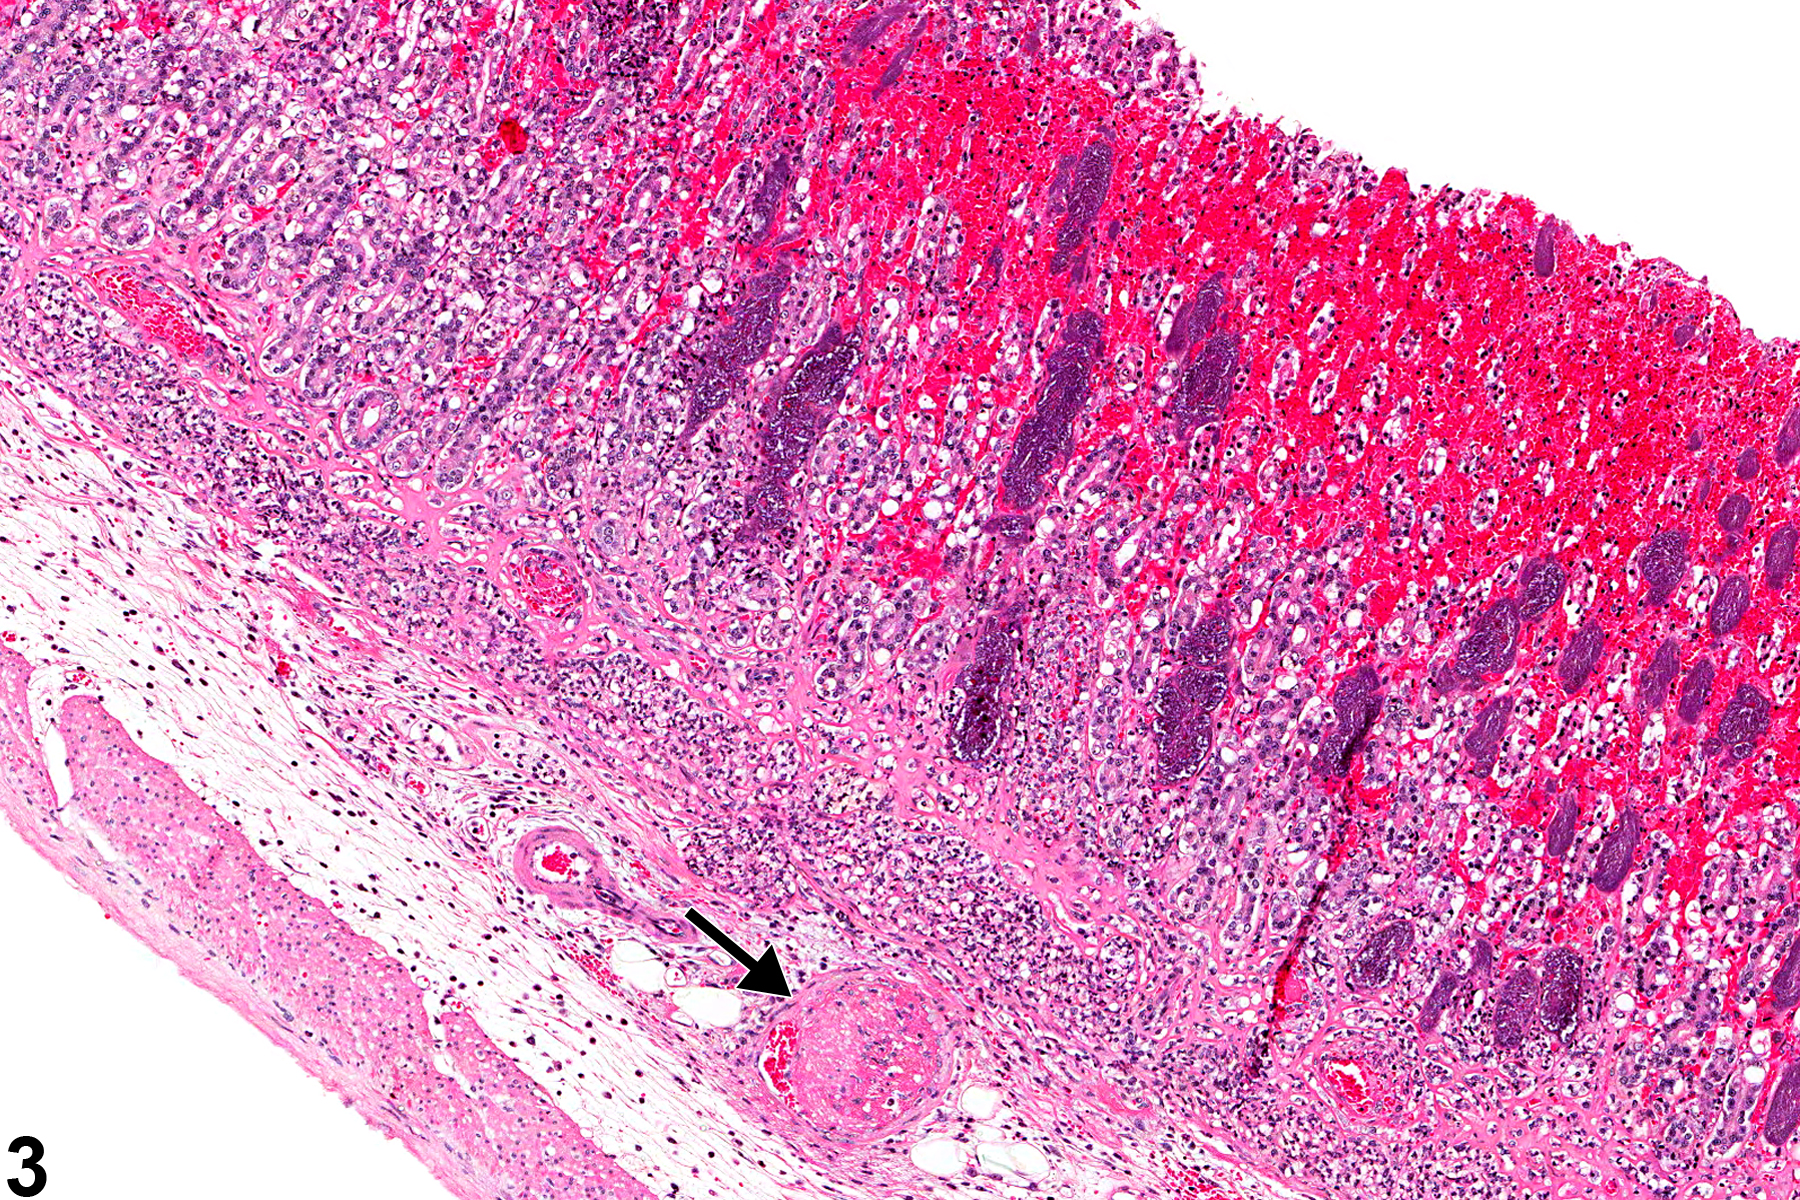 Image of necrosis in the glandular stomach from a male F344/N rat in a chronic study